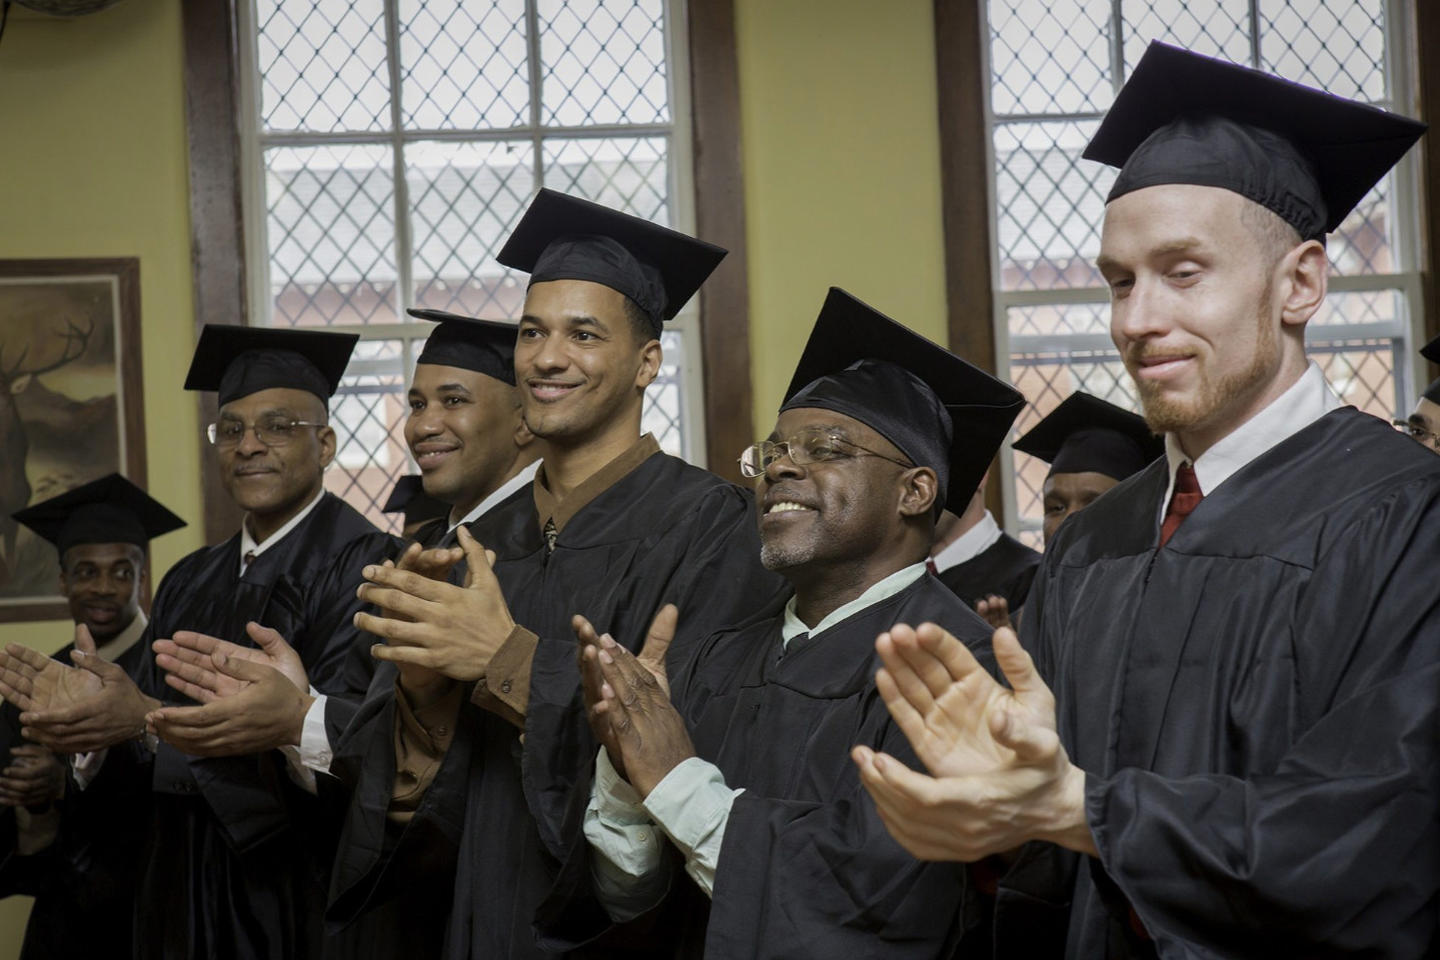 Group of smiling graduates in black robes and caps, clapping in a room with stained glass windows.